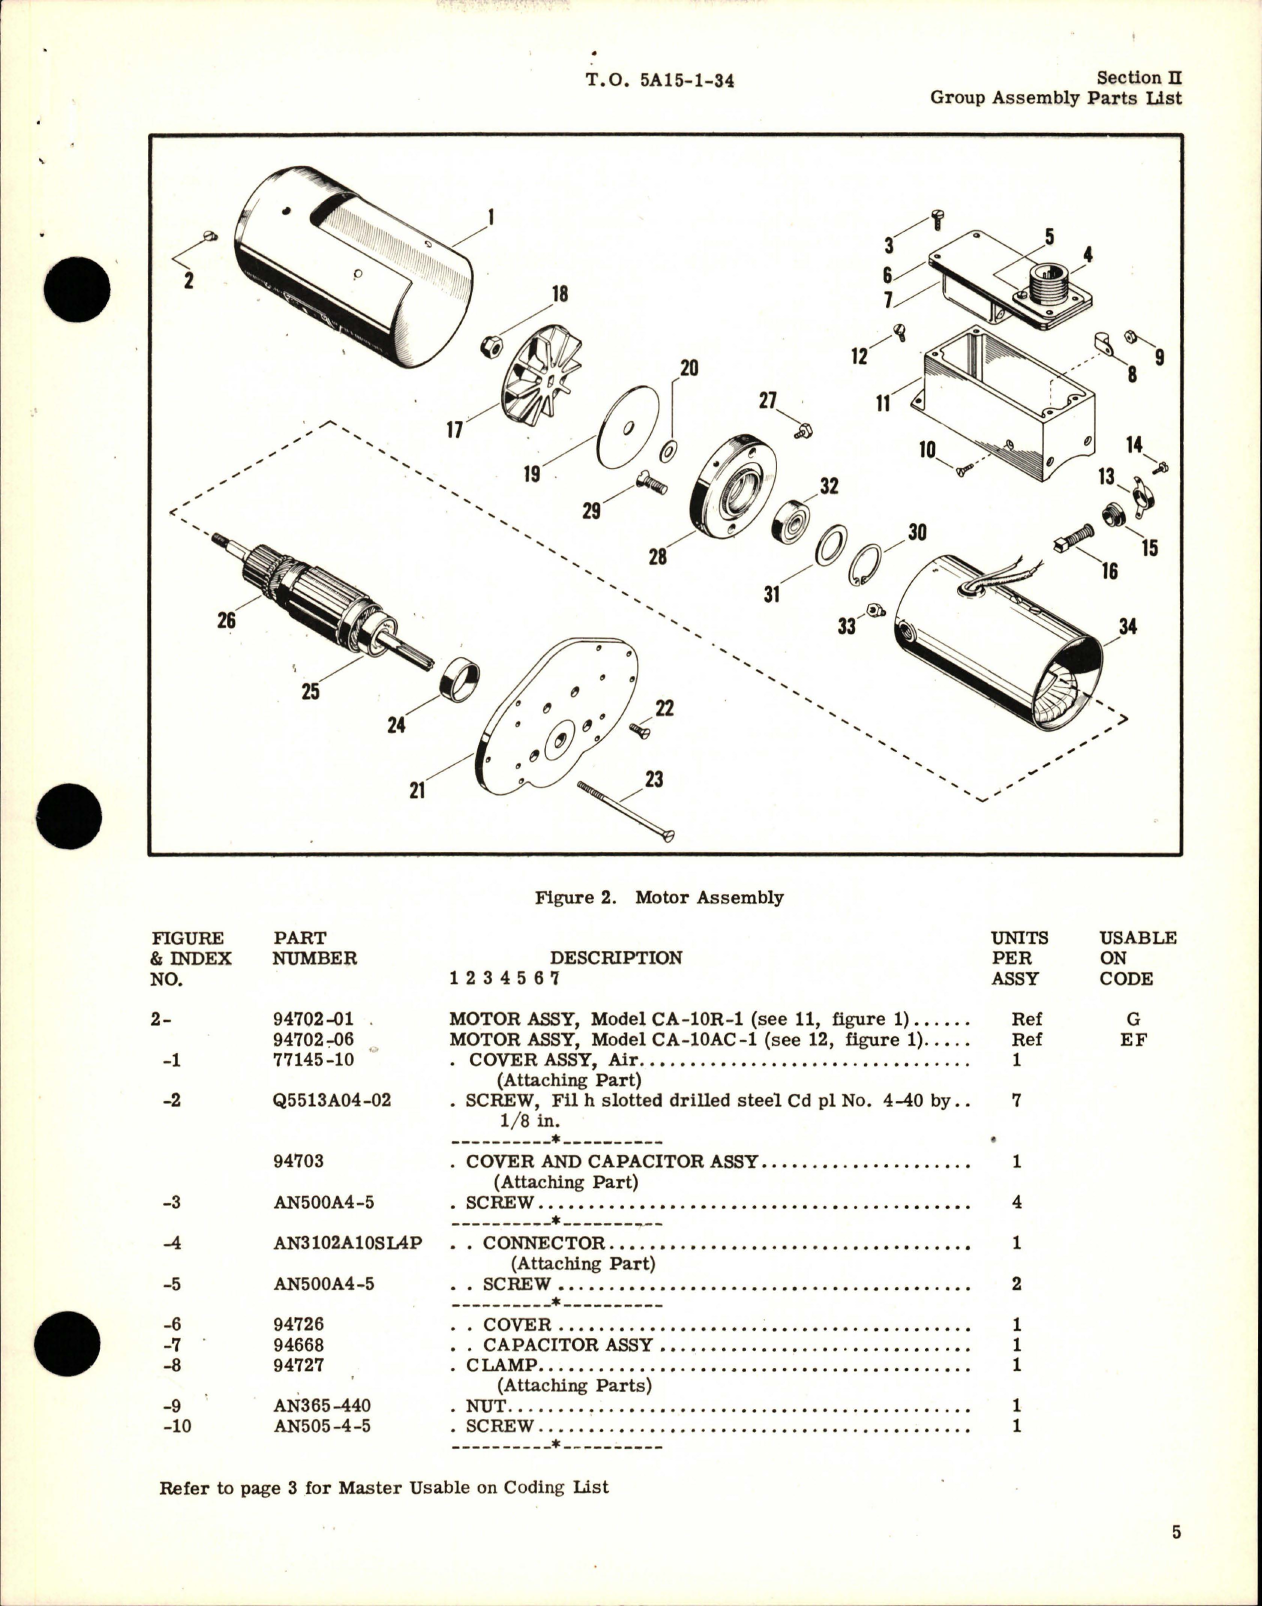 Sample page 5 from AirCorps Library document: Illustrated Parts for Servo Motor Drive Assembly, Servo Drum and Bracket Assembly, Follow-Up Control Assembly